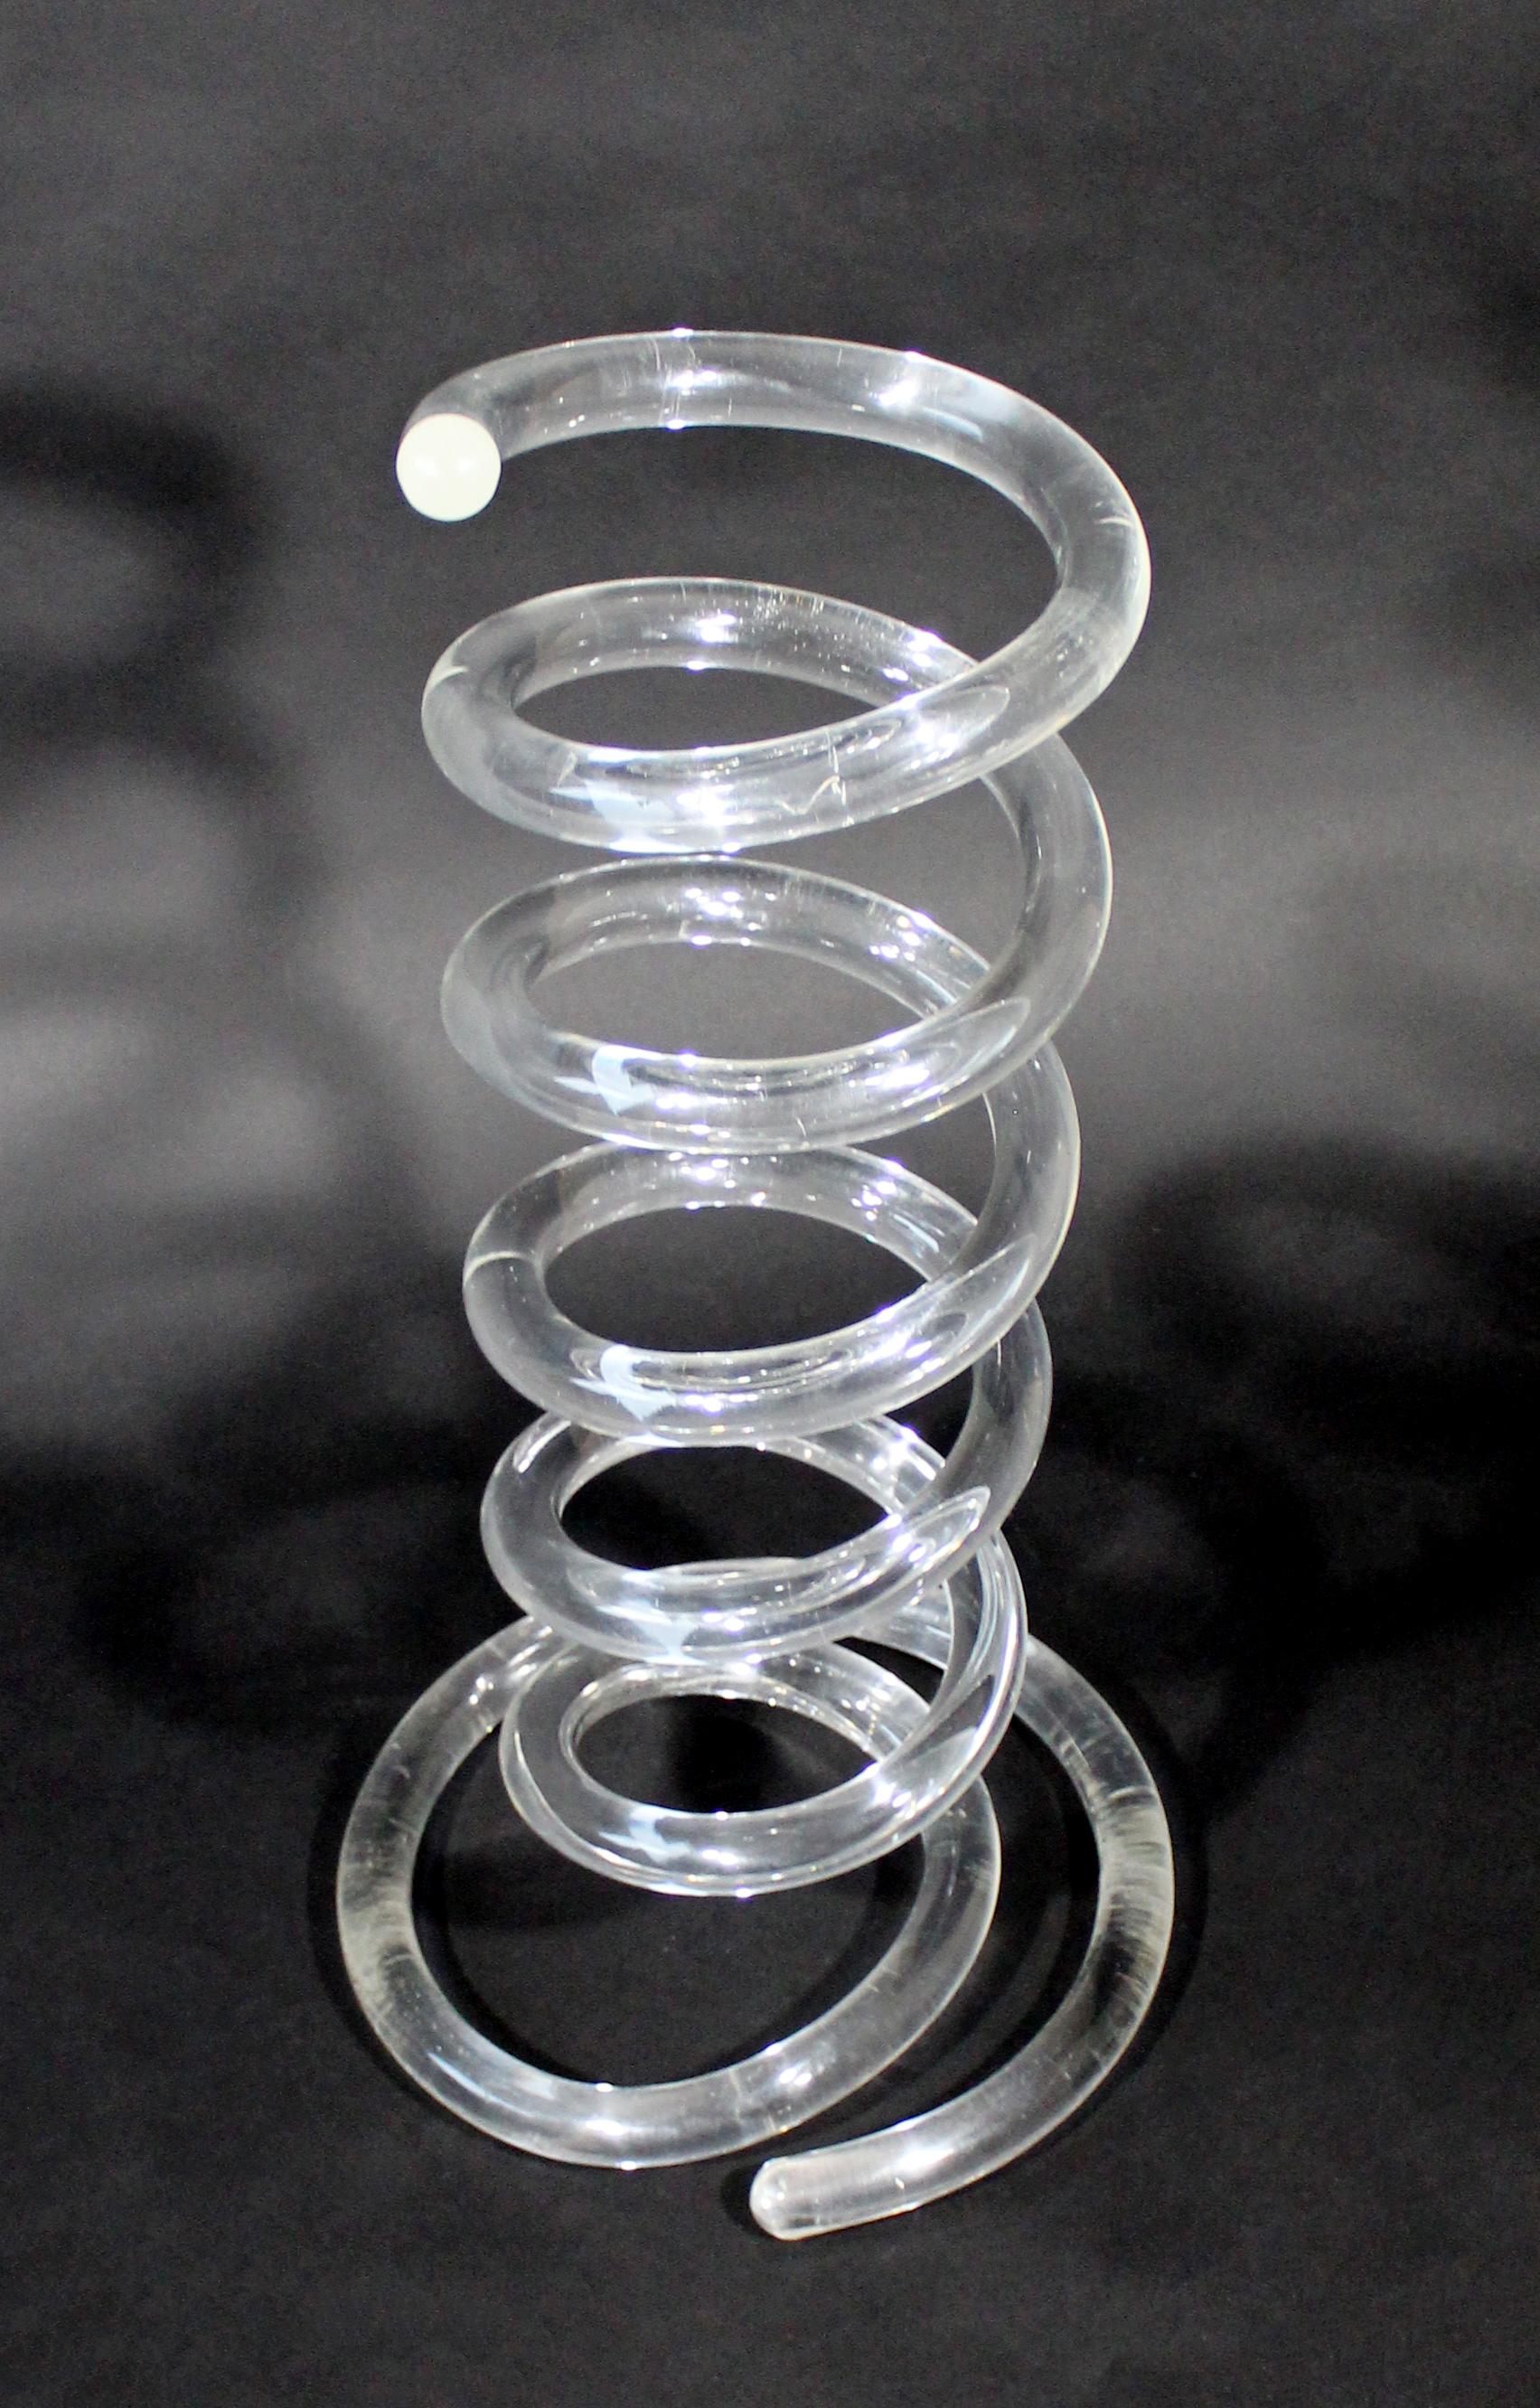 A phenomenal, Lucite, spiral umbrella holder or stand, by Dorothy Thorpe, circa 1970s. In excellent condition. The dimensions are 11